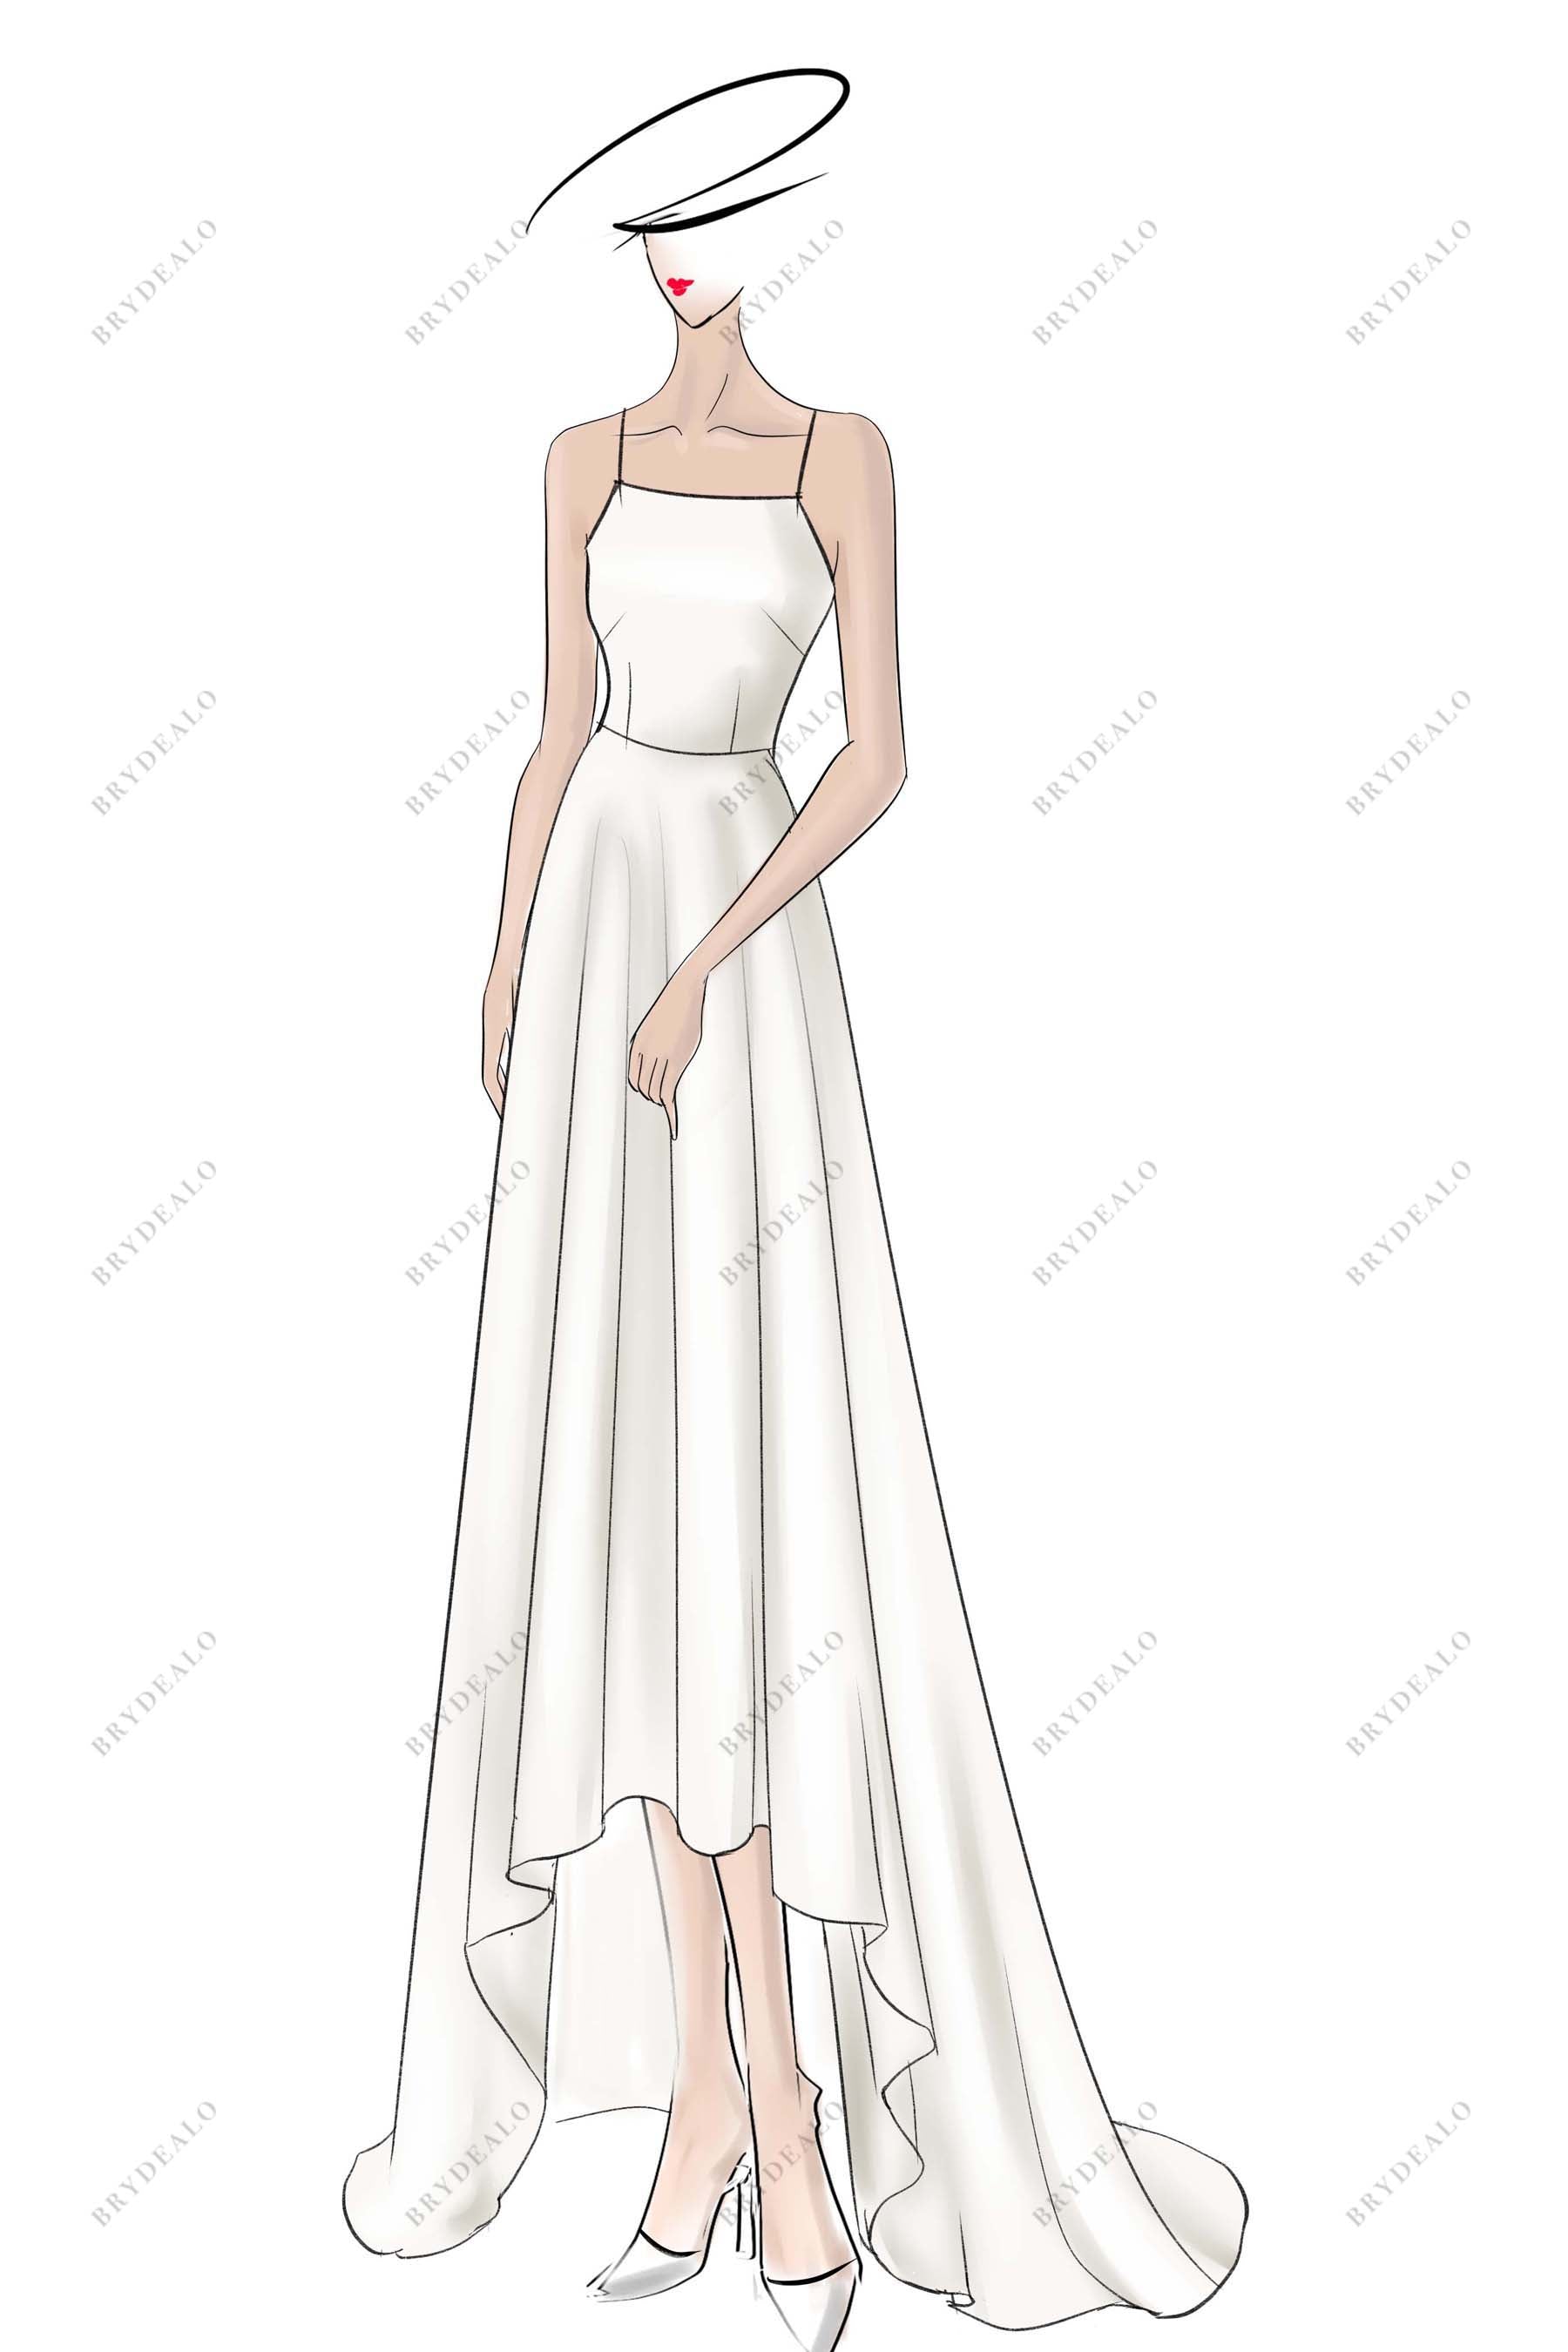 Fashion illustration by Mohita - Hello everybody Illustration completed ✓  While searching for my new Illustration, I saw this lovely garment designed  by @abujanisandeepkhosla wore by @sonamkapoor and I thought why not